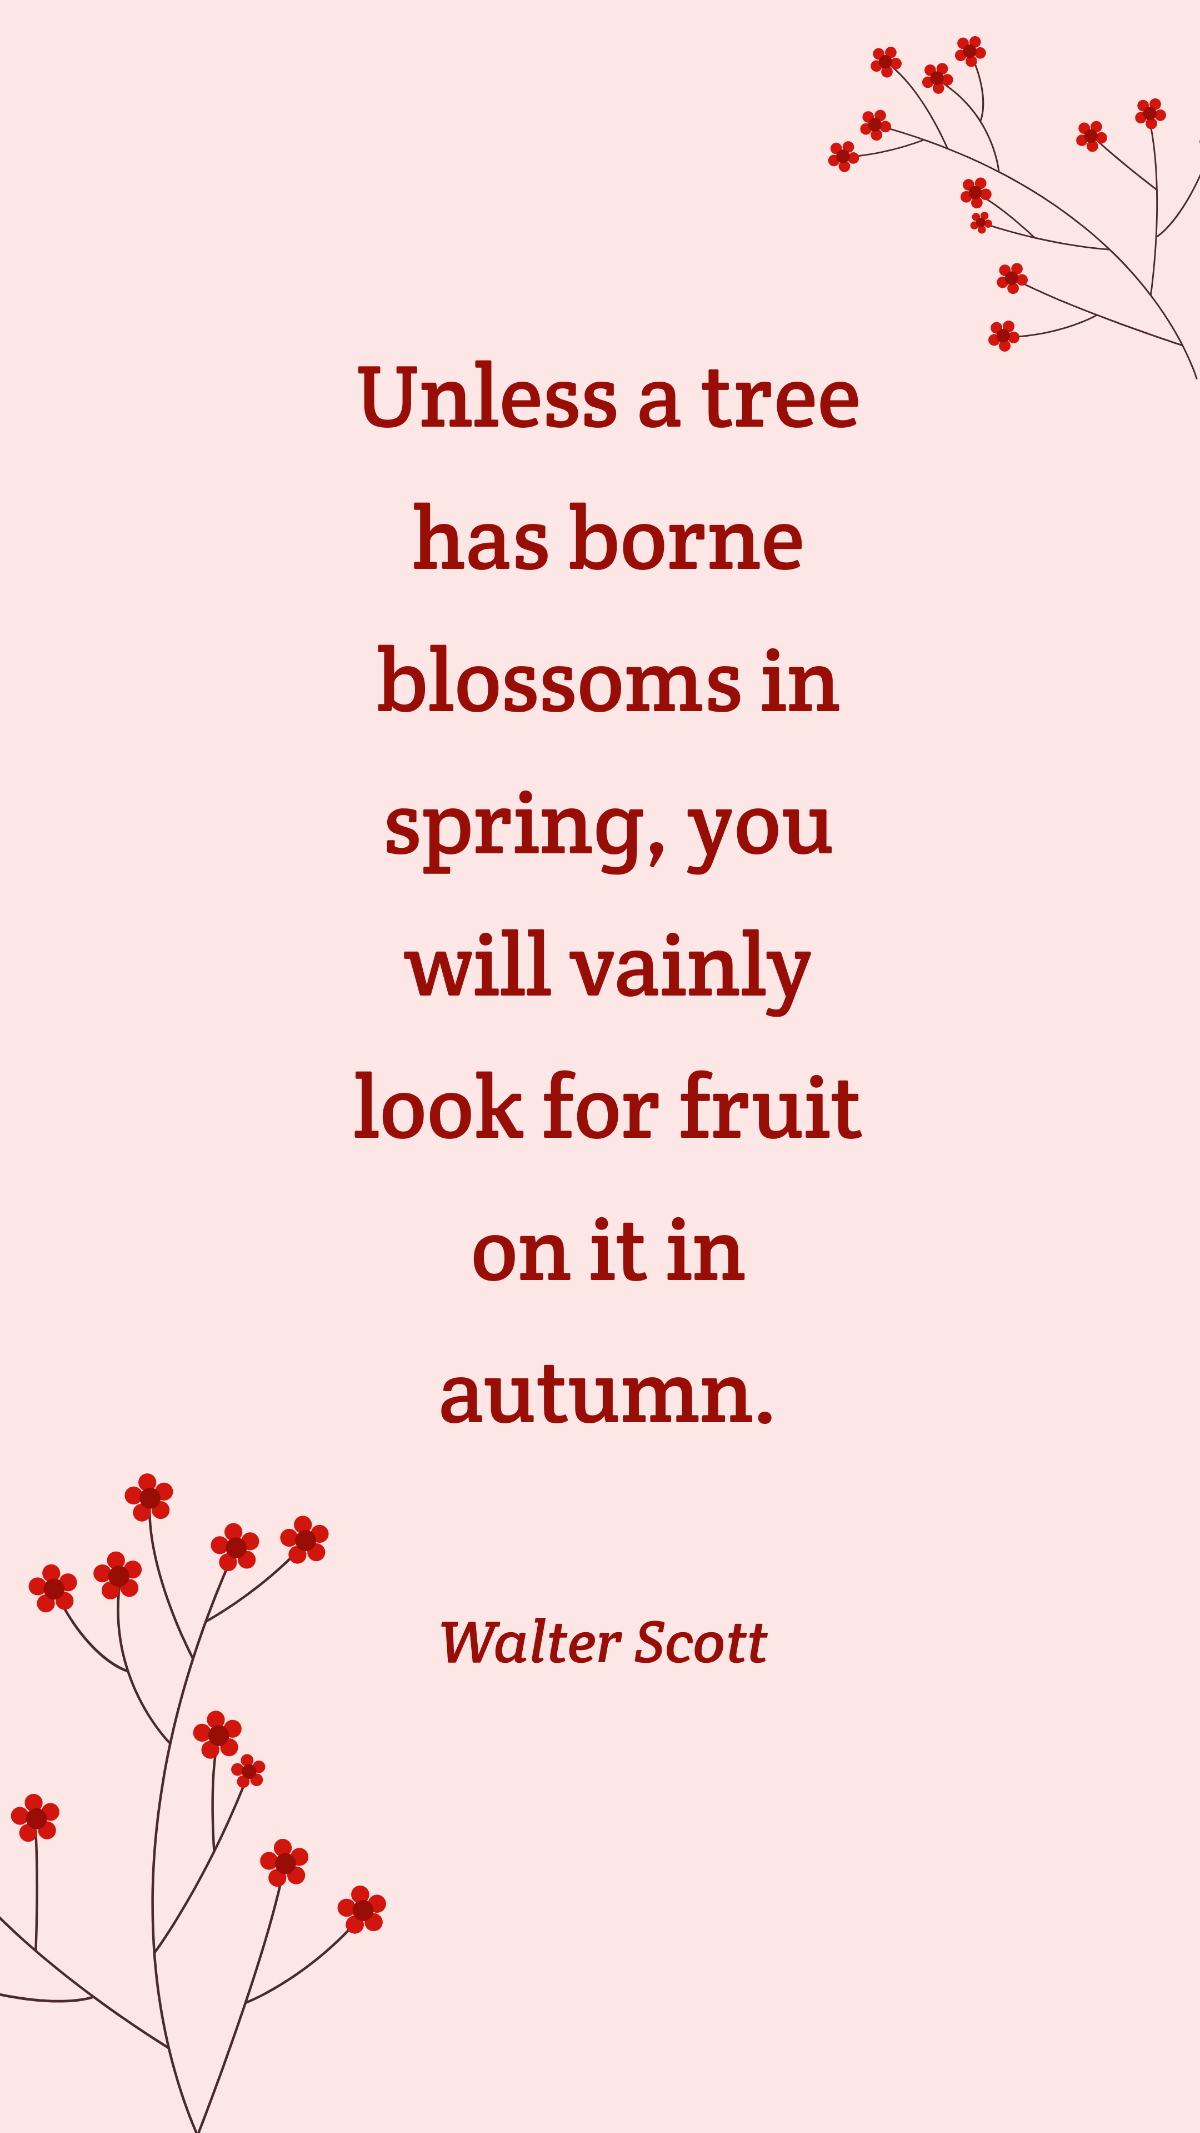 Walter Scott - Unless a tree has borne blossoms in spring, you will vainly look for fruit on it in autumn.